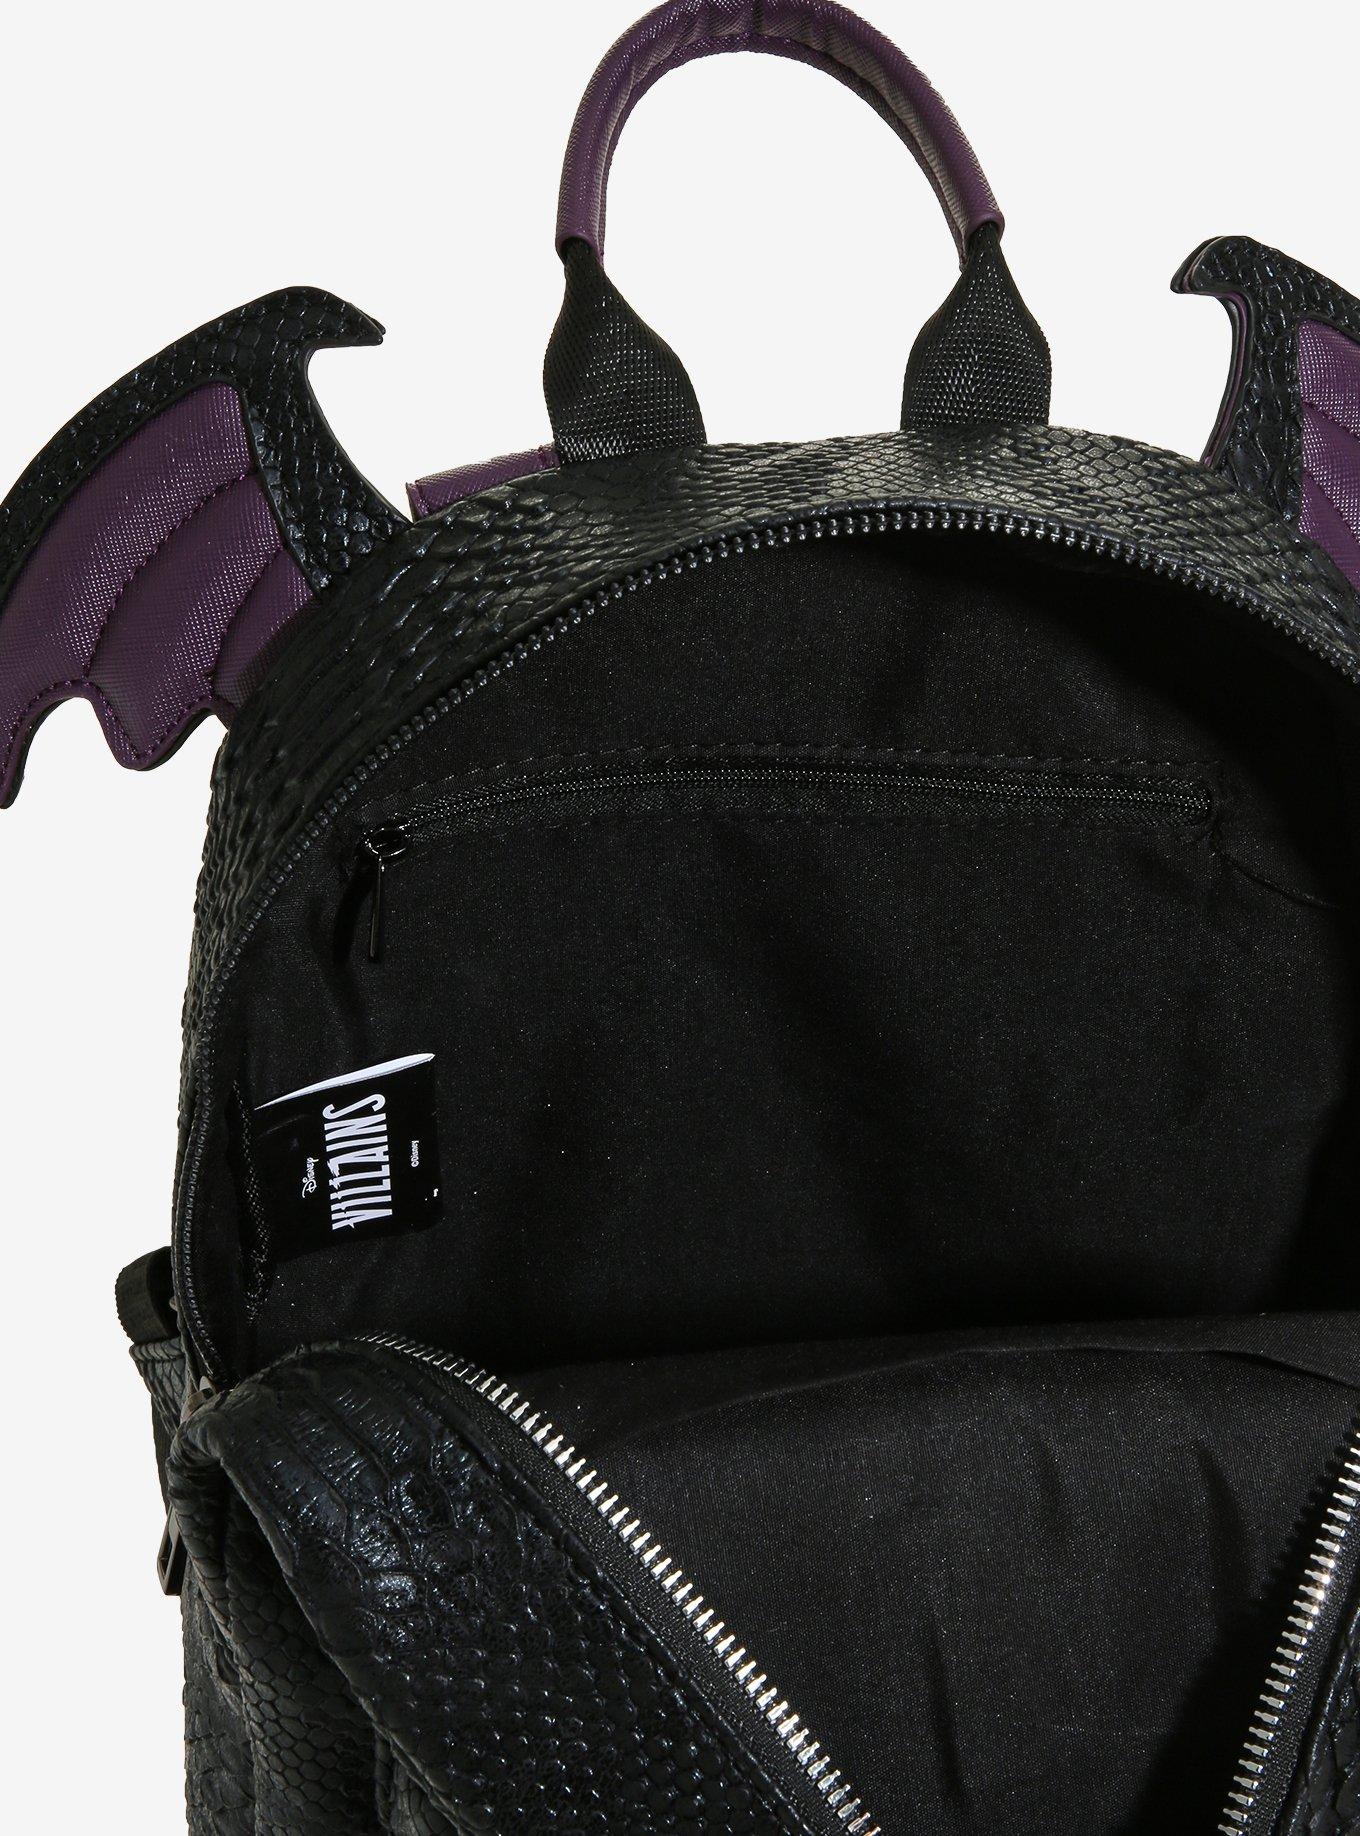 Our @loungefly Exclusive Disney Villains Maleficent Dragon Mini